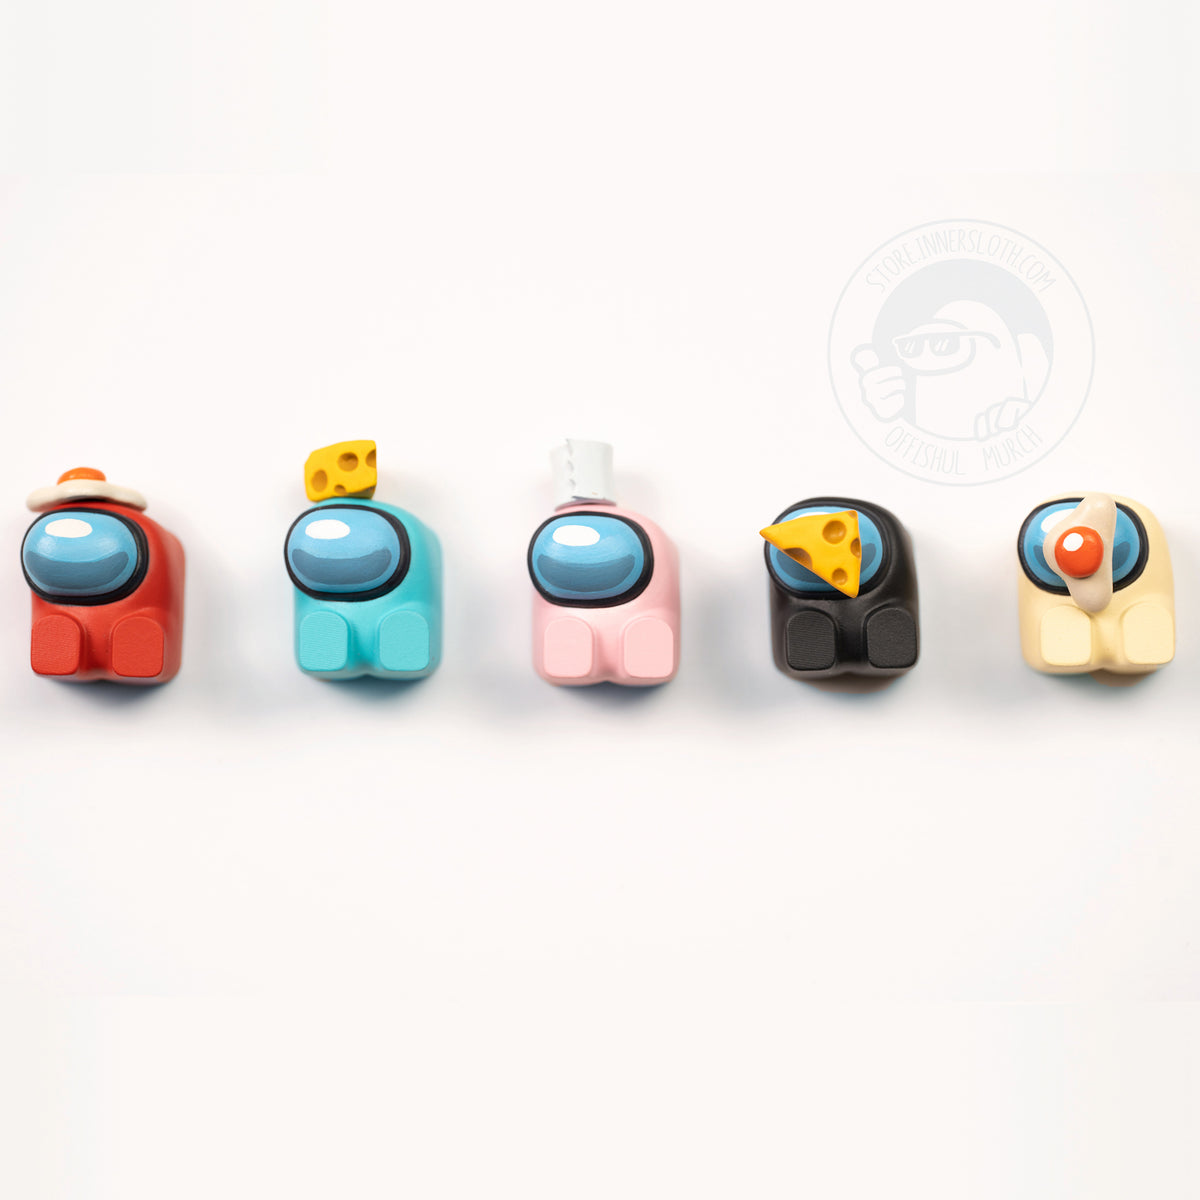 A product photo of the five different crewmate keyboard keycaps laying in a neat row with different hats in either egg, cheese, or toilet paper.